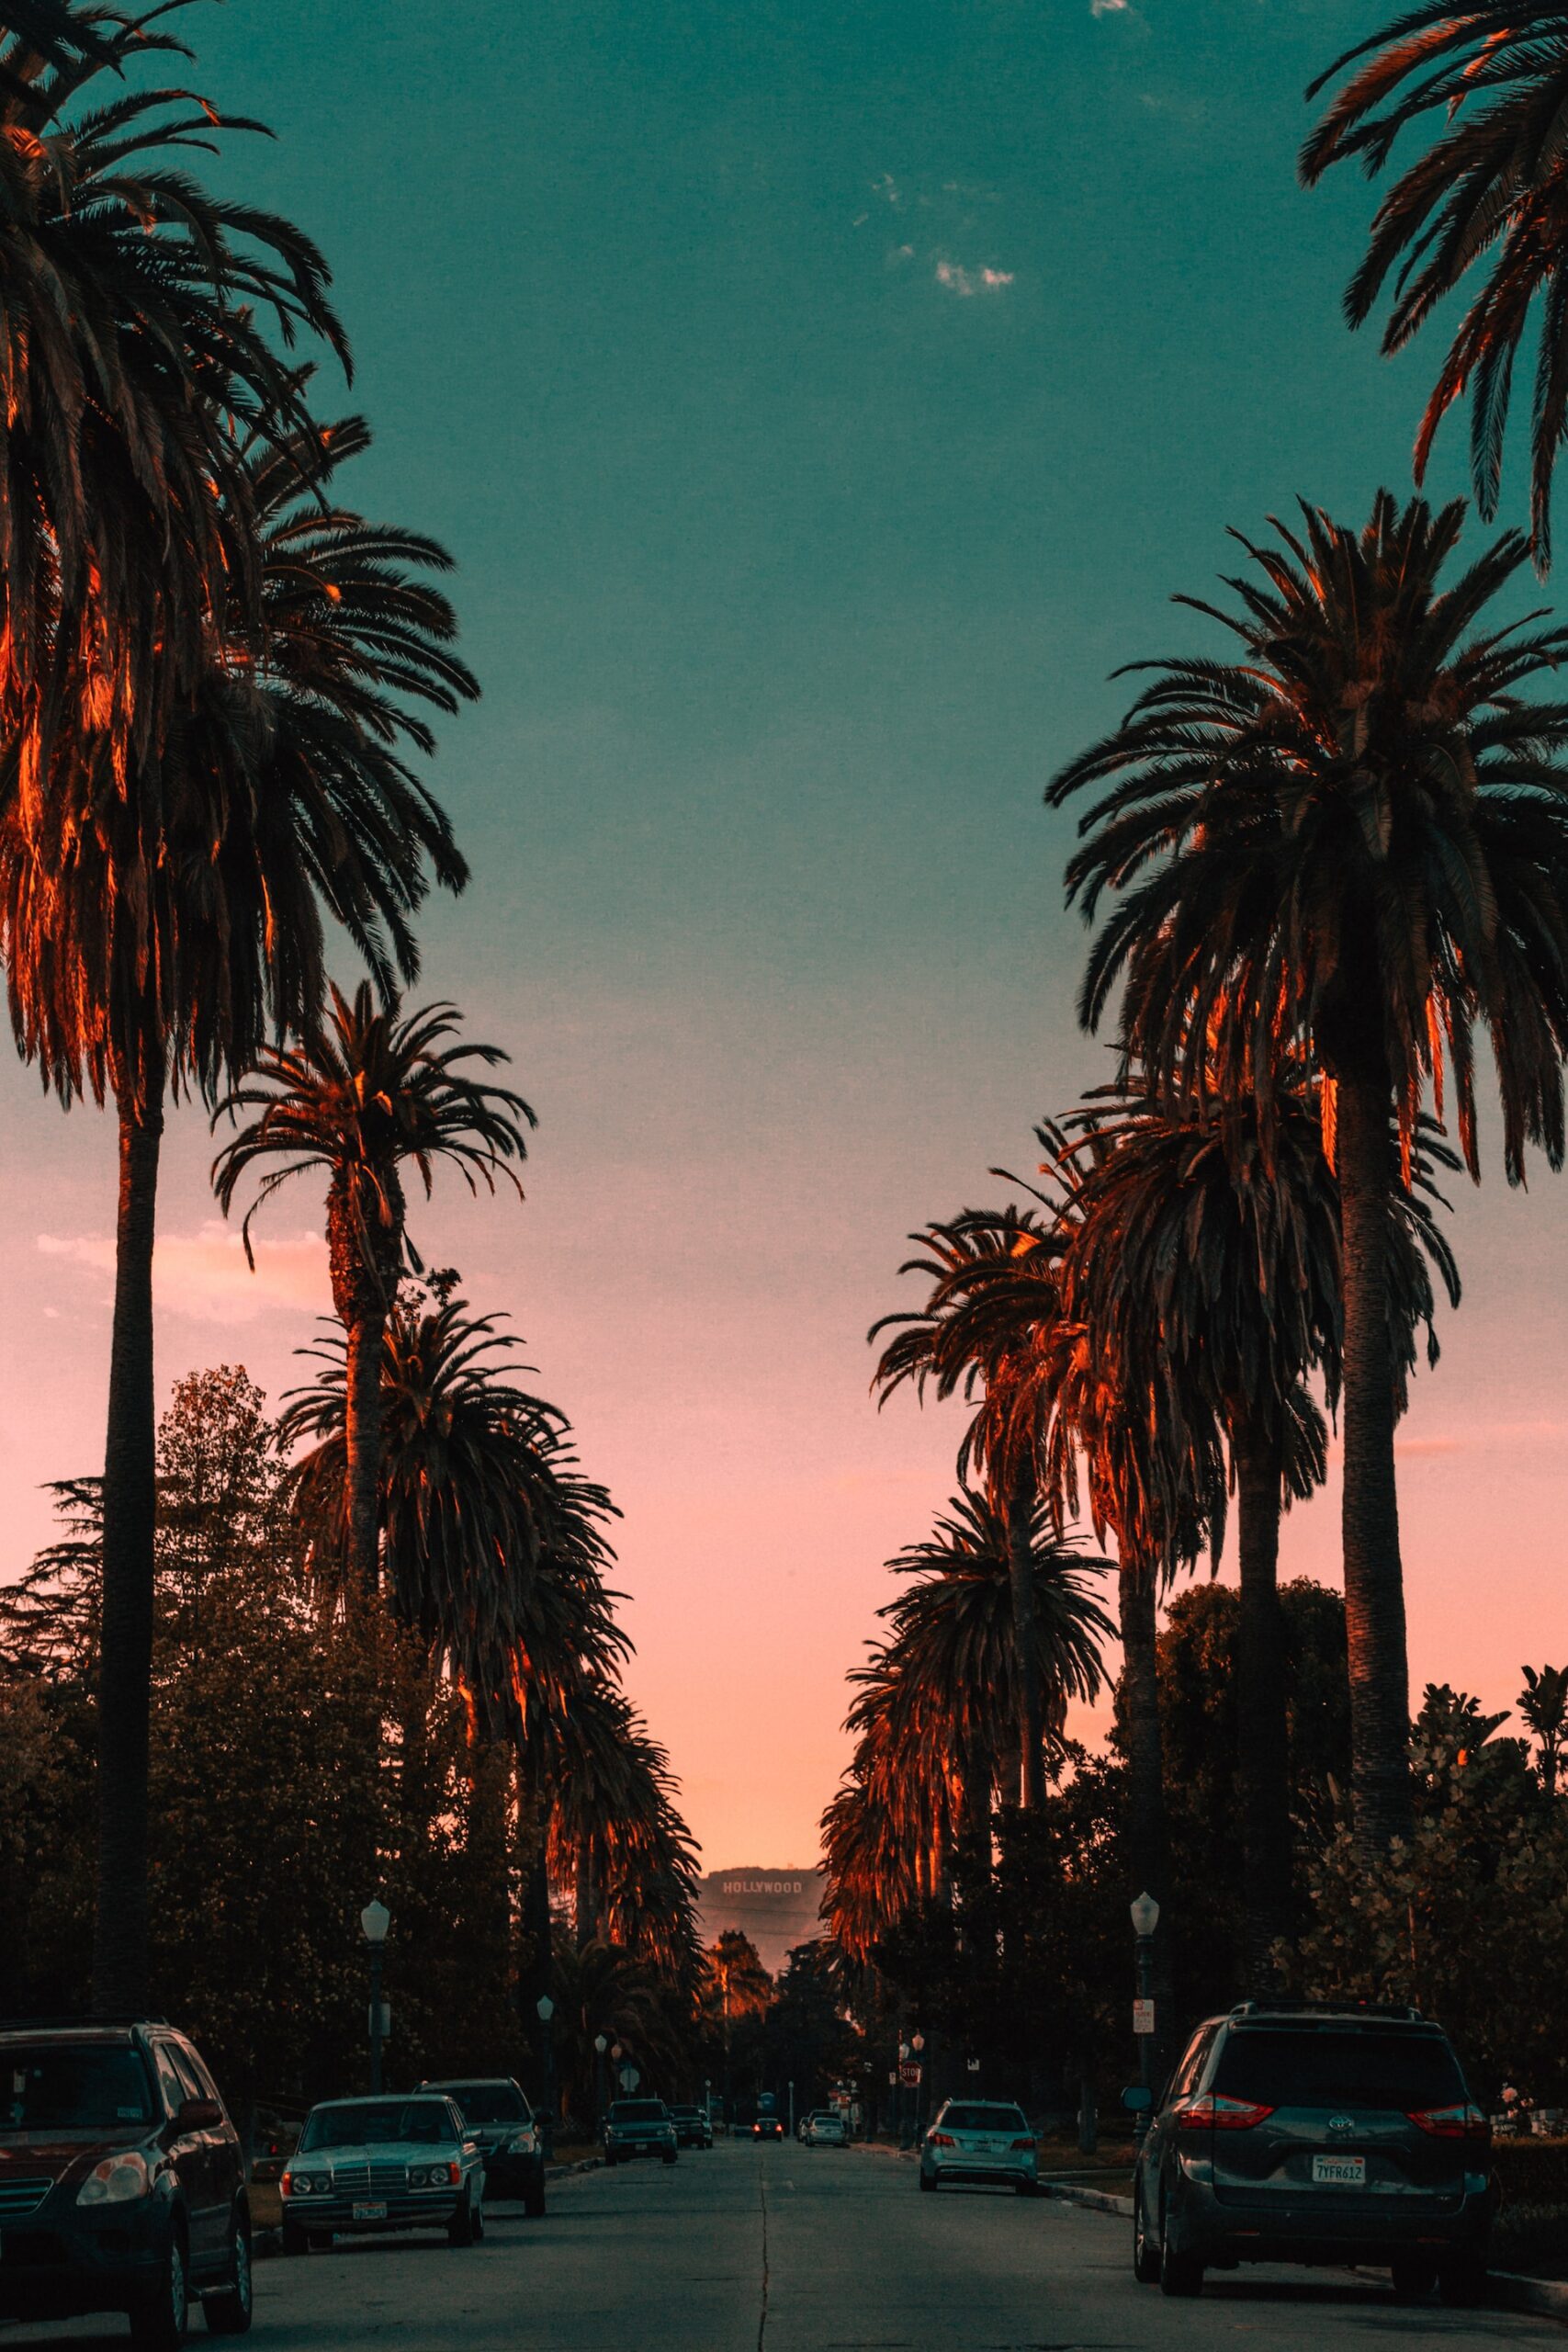 Palm trees at sunset on a street with parked cars in Rancho Cucamonga, California.